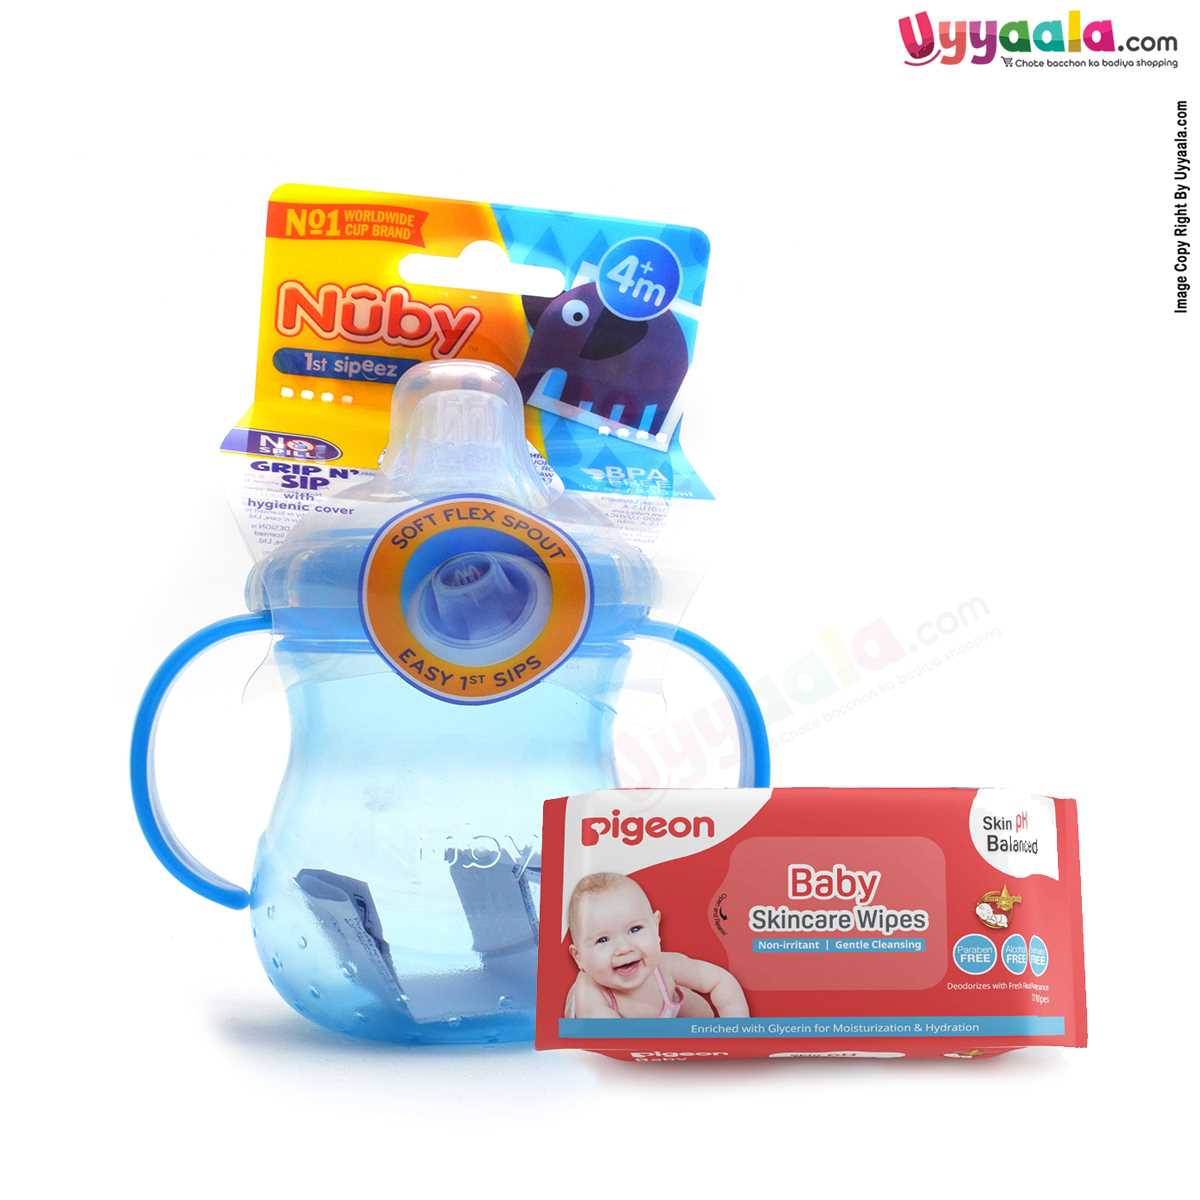 NUBY 'Grip n sip' sipper with soft flexible spout - Blue, 300ml, 4+m age & PIGEON Baby skincare wipes 72pcs(combo pack)